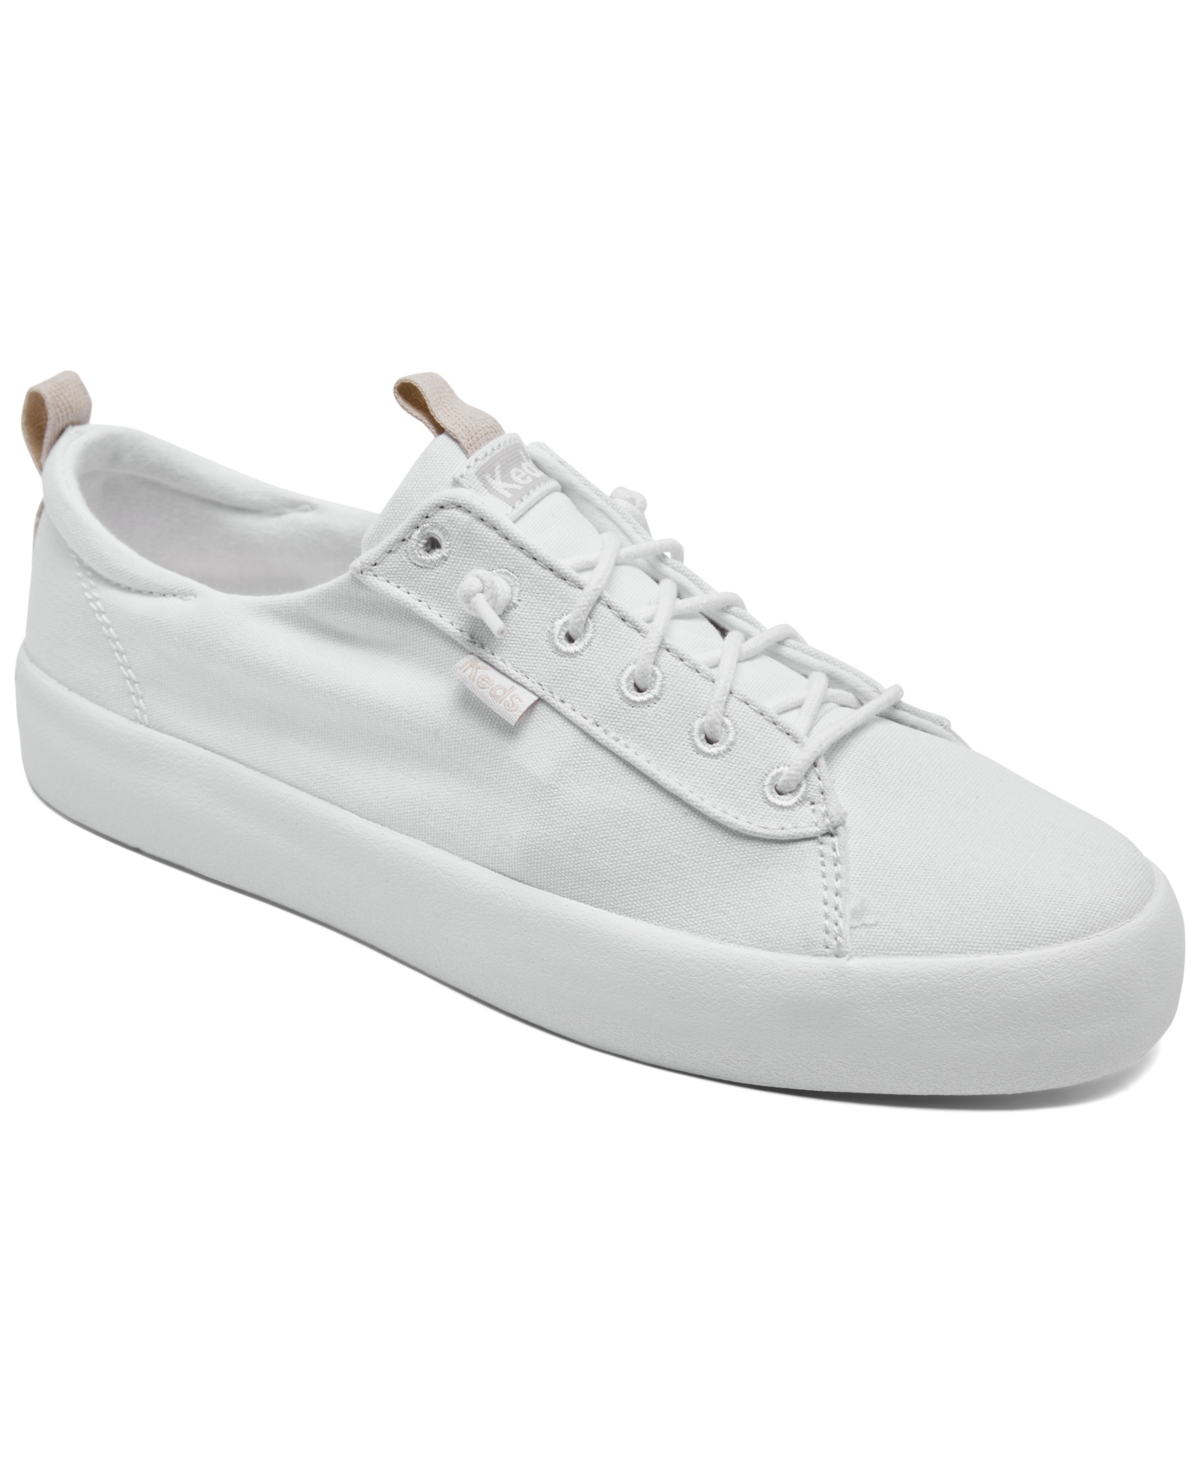 Women's Kickback Canvas Casual Sneakers from Finish Line - White